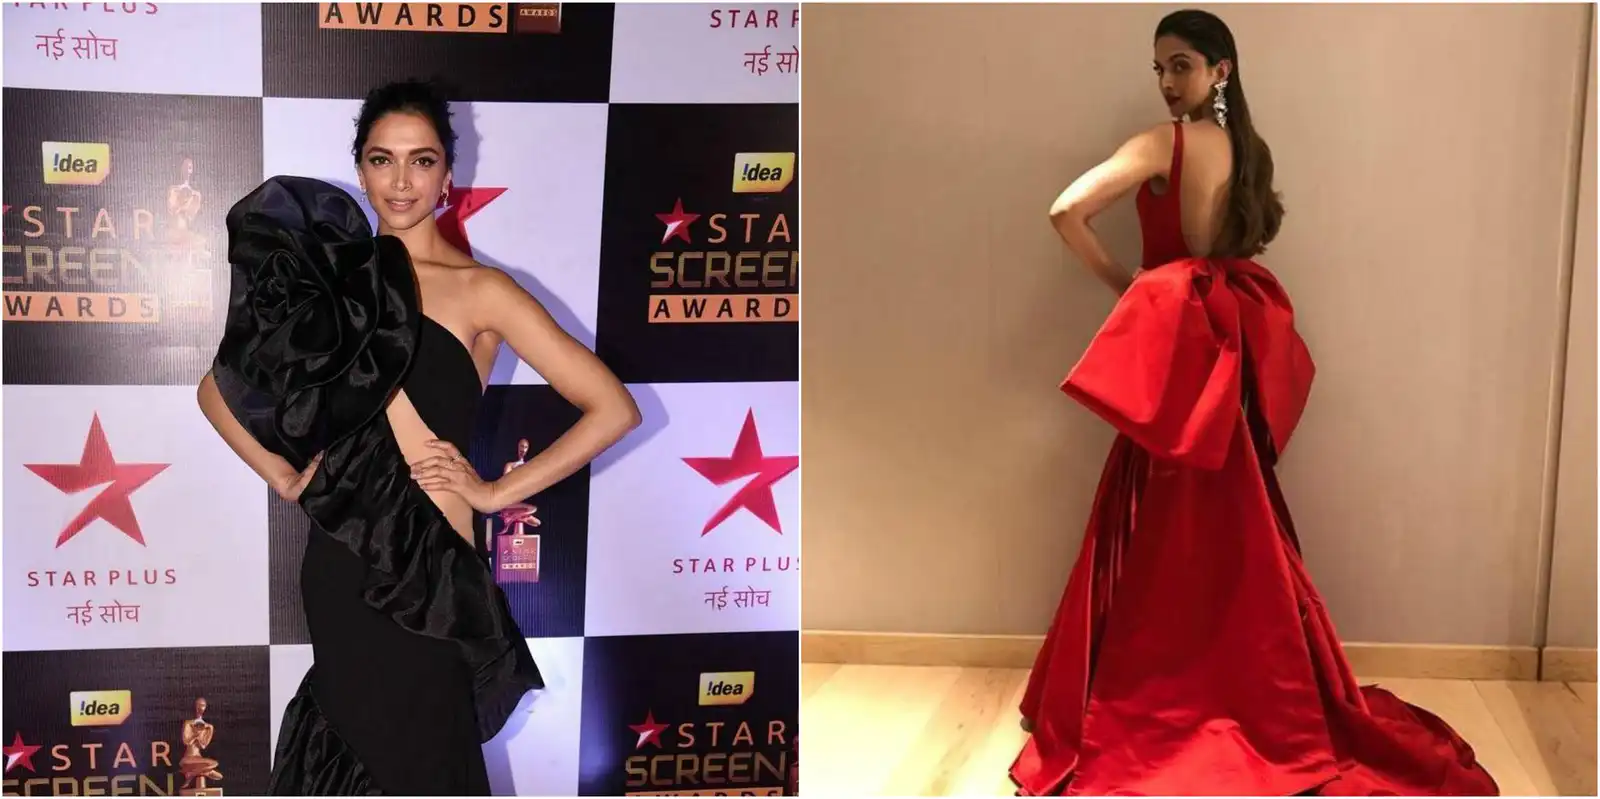 Cannes 2019: Deepika Padukone's Fashion Has Been Inspired By Gift Wrapping Prior To Cannes As Well